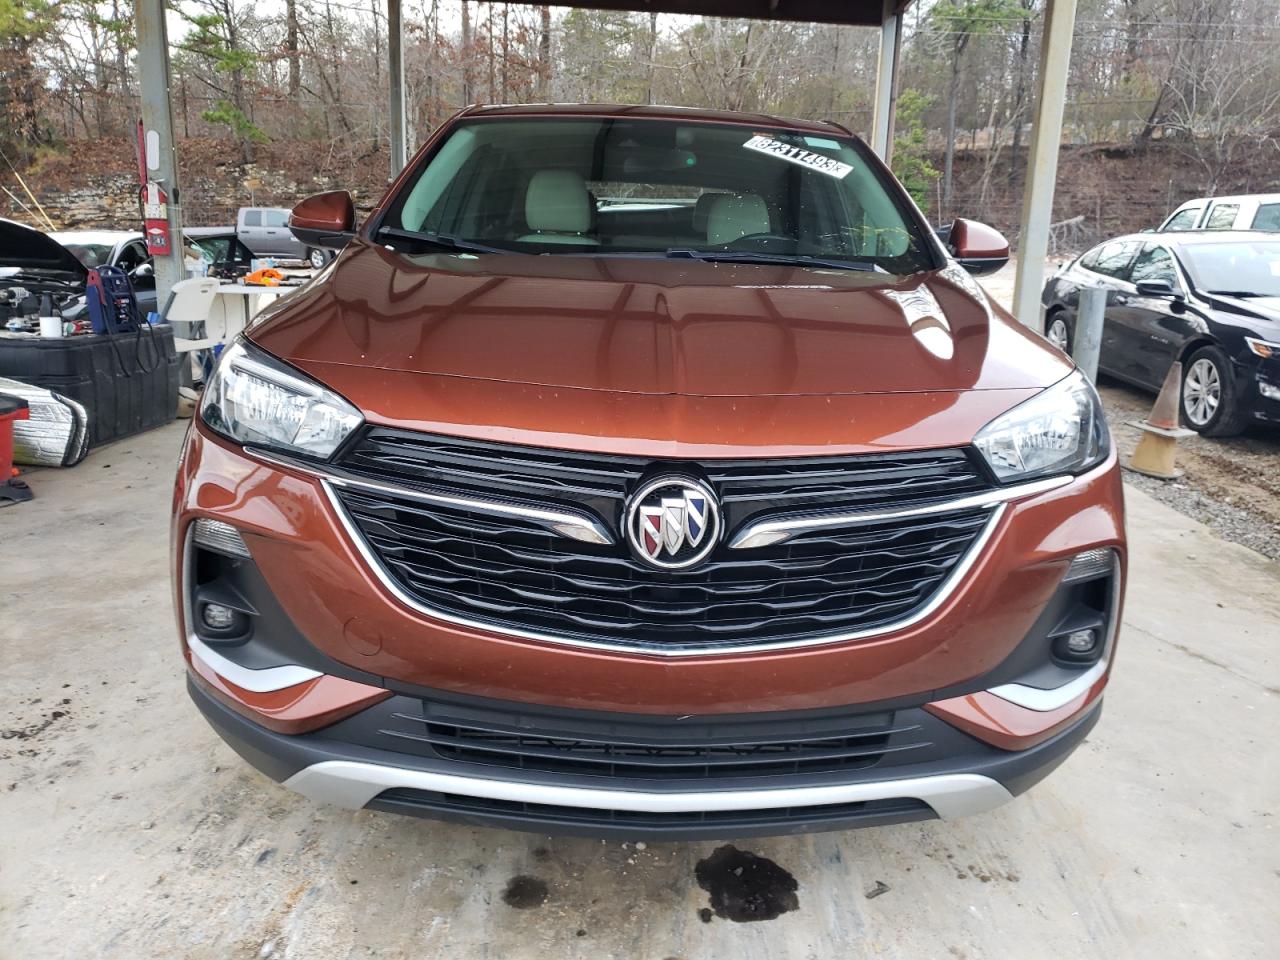 KL4MMBS29LB****** Used and Repairable 2020 Buick Encore in Alabama State